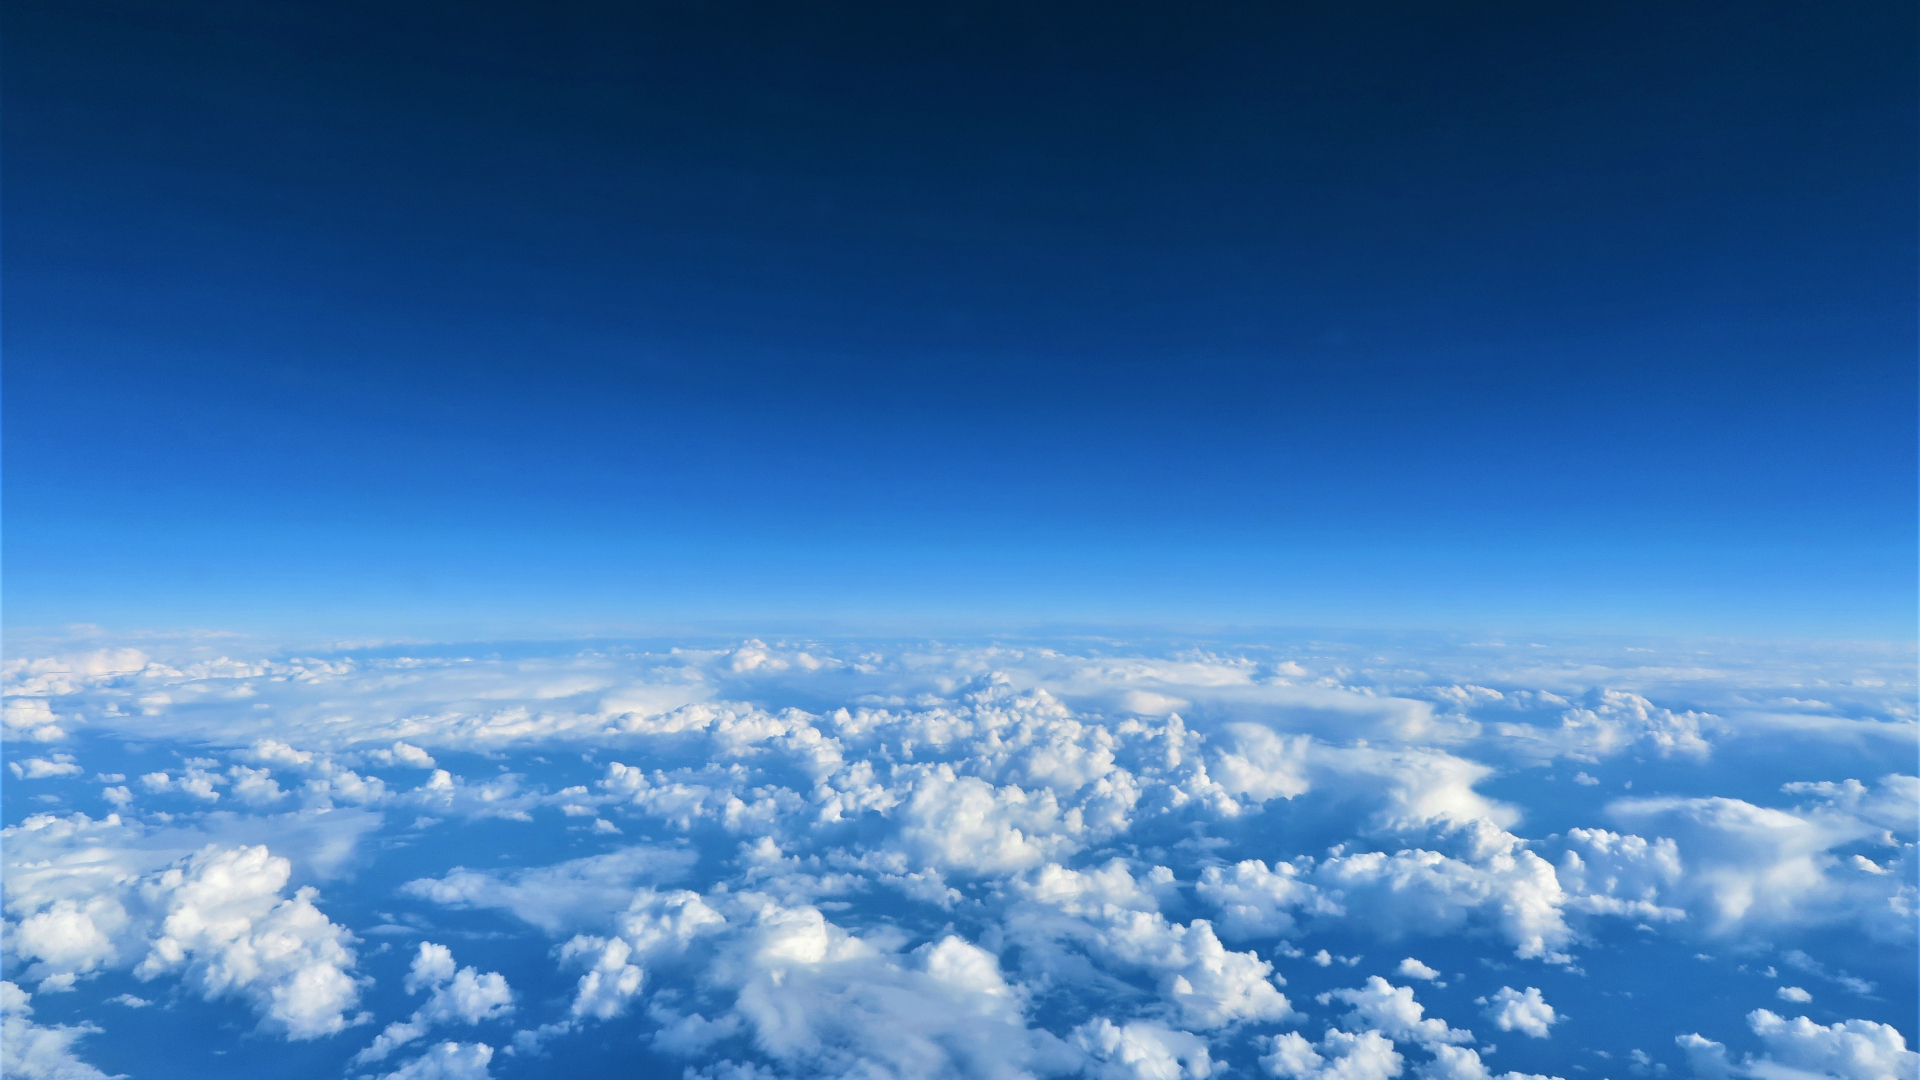 Download blue sky, above clouds 1920x1080 wallpaper, full hd, hdtv, fhd